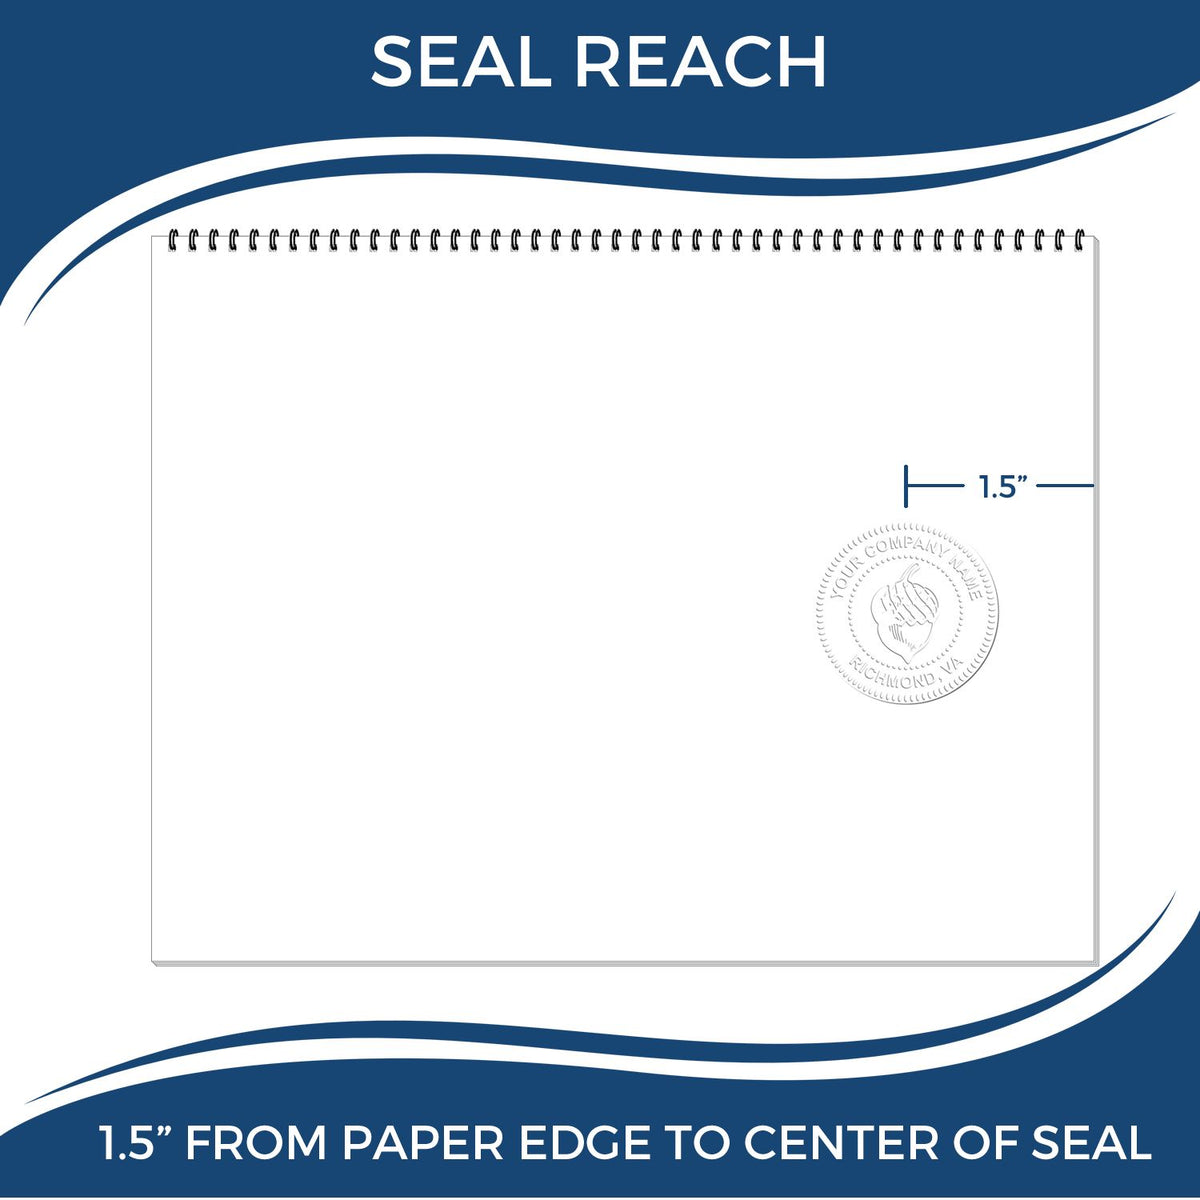 An infographic showing the seal reach which is represented by a ruler and a miniature seal image of the Gift Idaho Geologist Seal